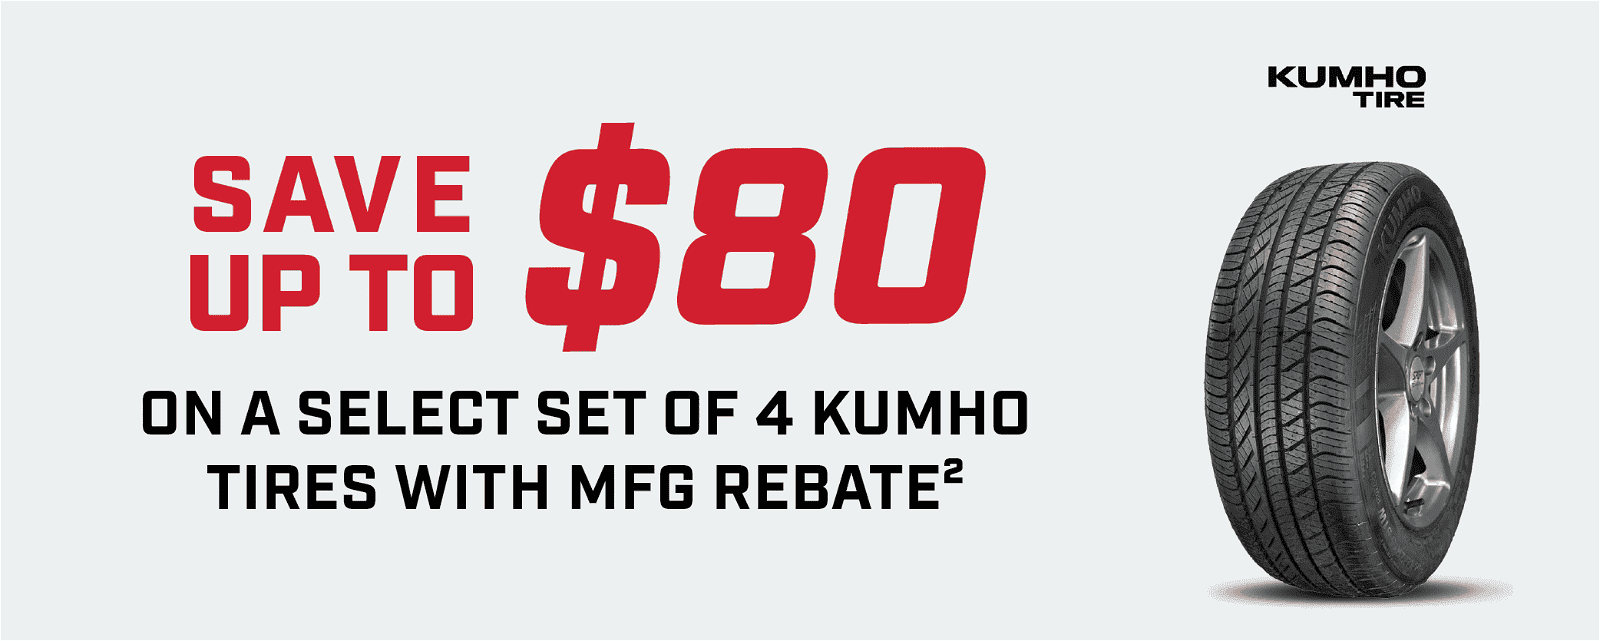 Save up to \\$80 on a select set of 4 Kumho Tires with MFG Rebate2